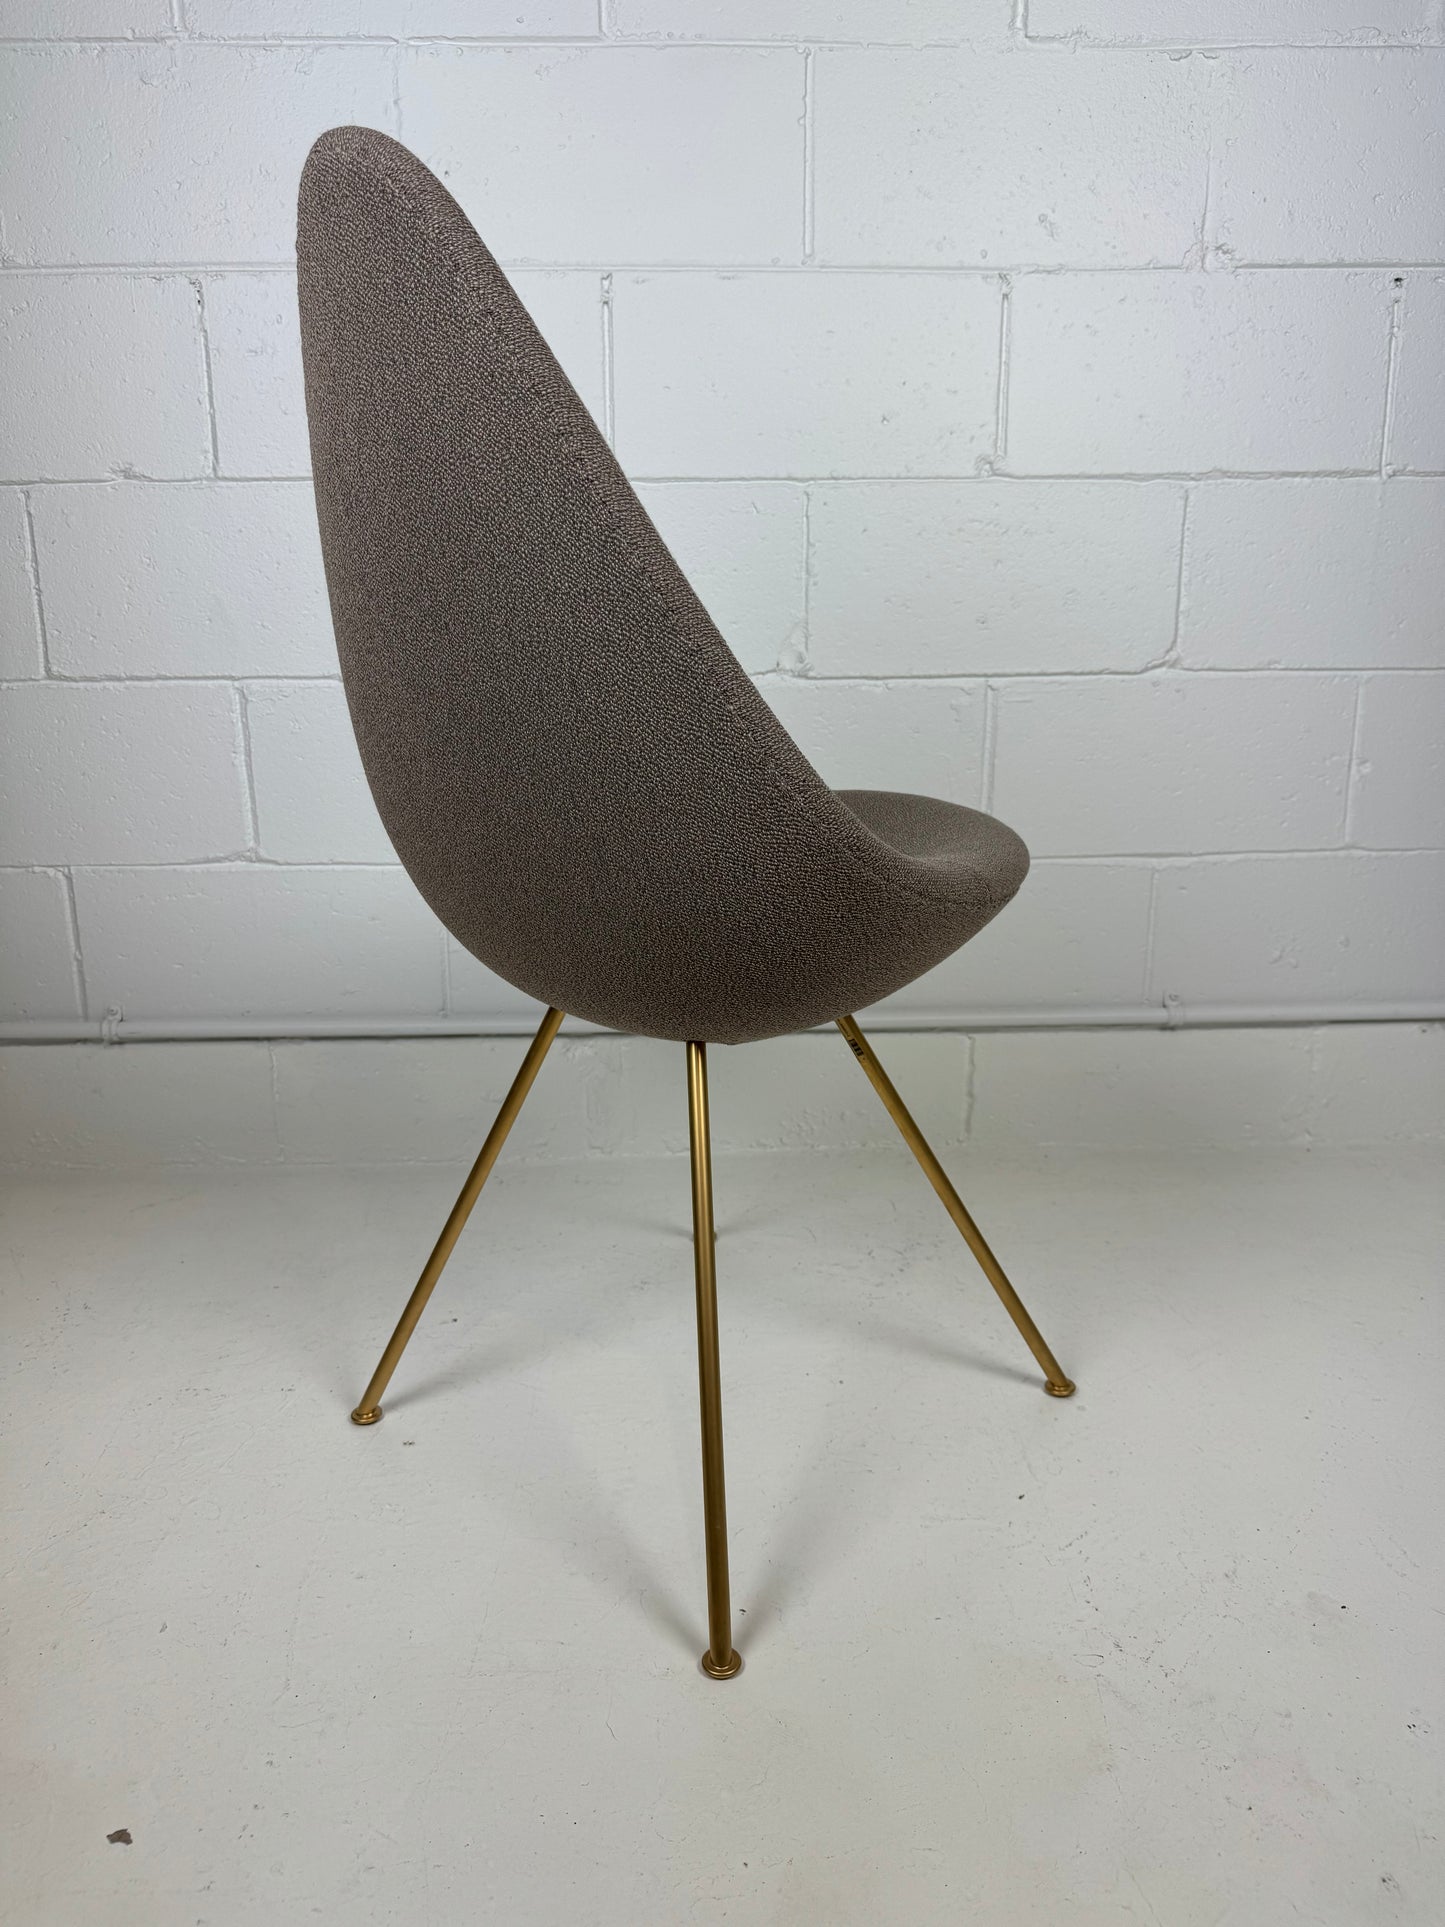 Arne Jacobsen 60th Anniversary Limited Edition Drop Chair by Fritz Hansen